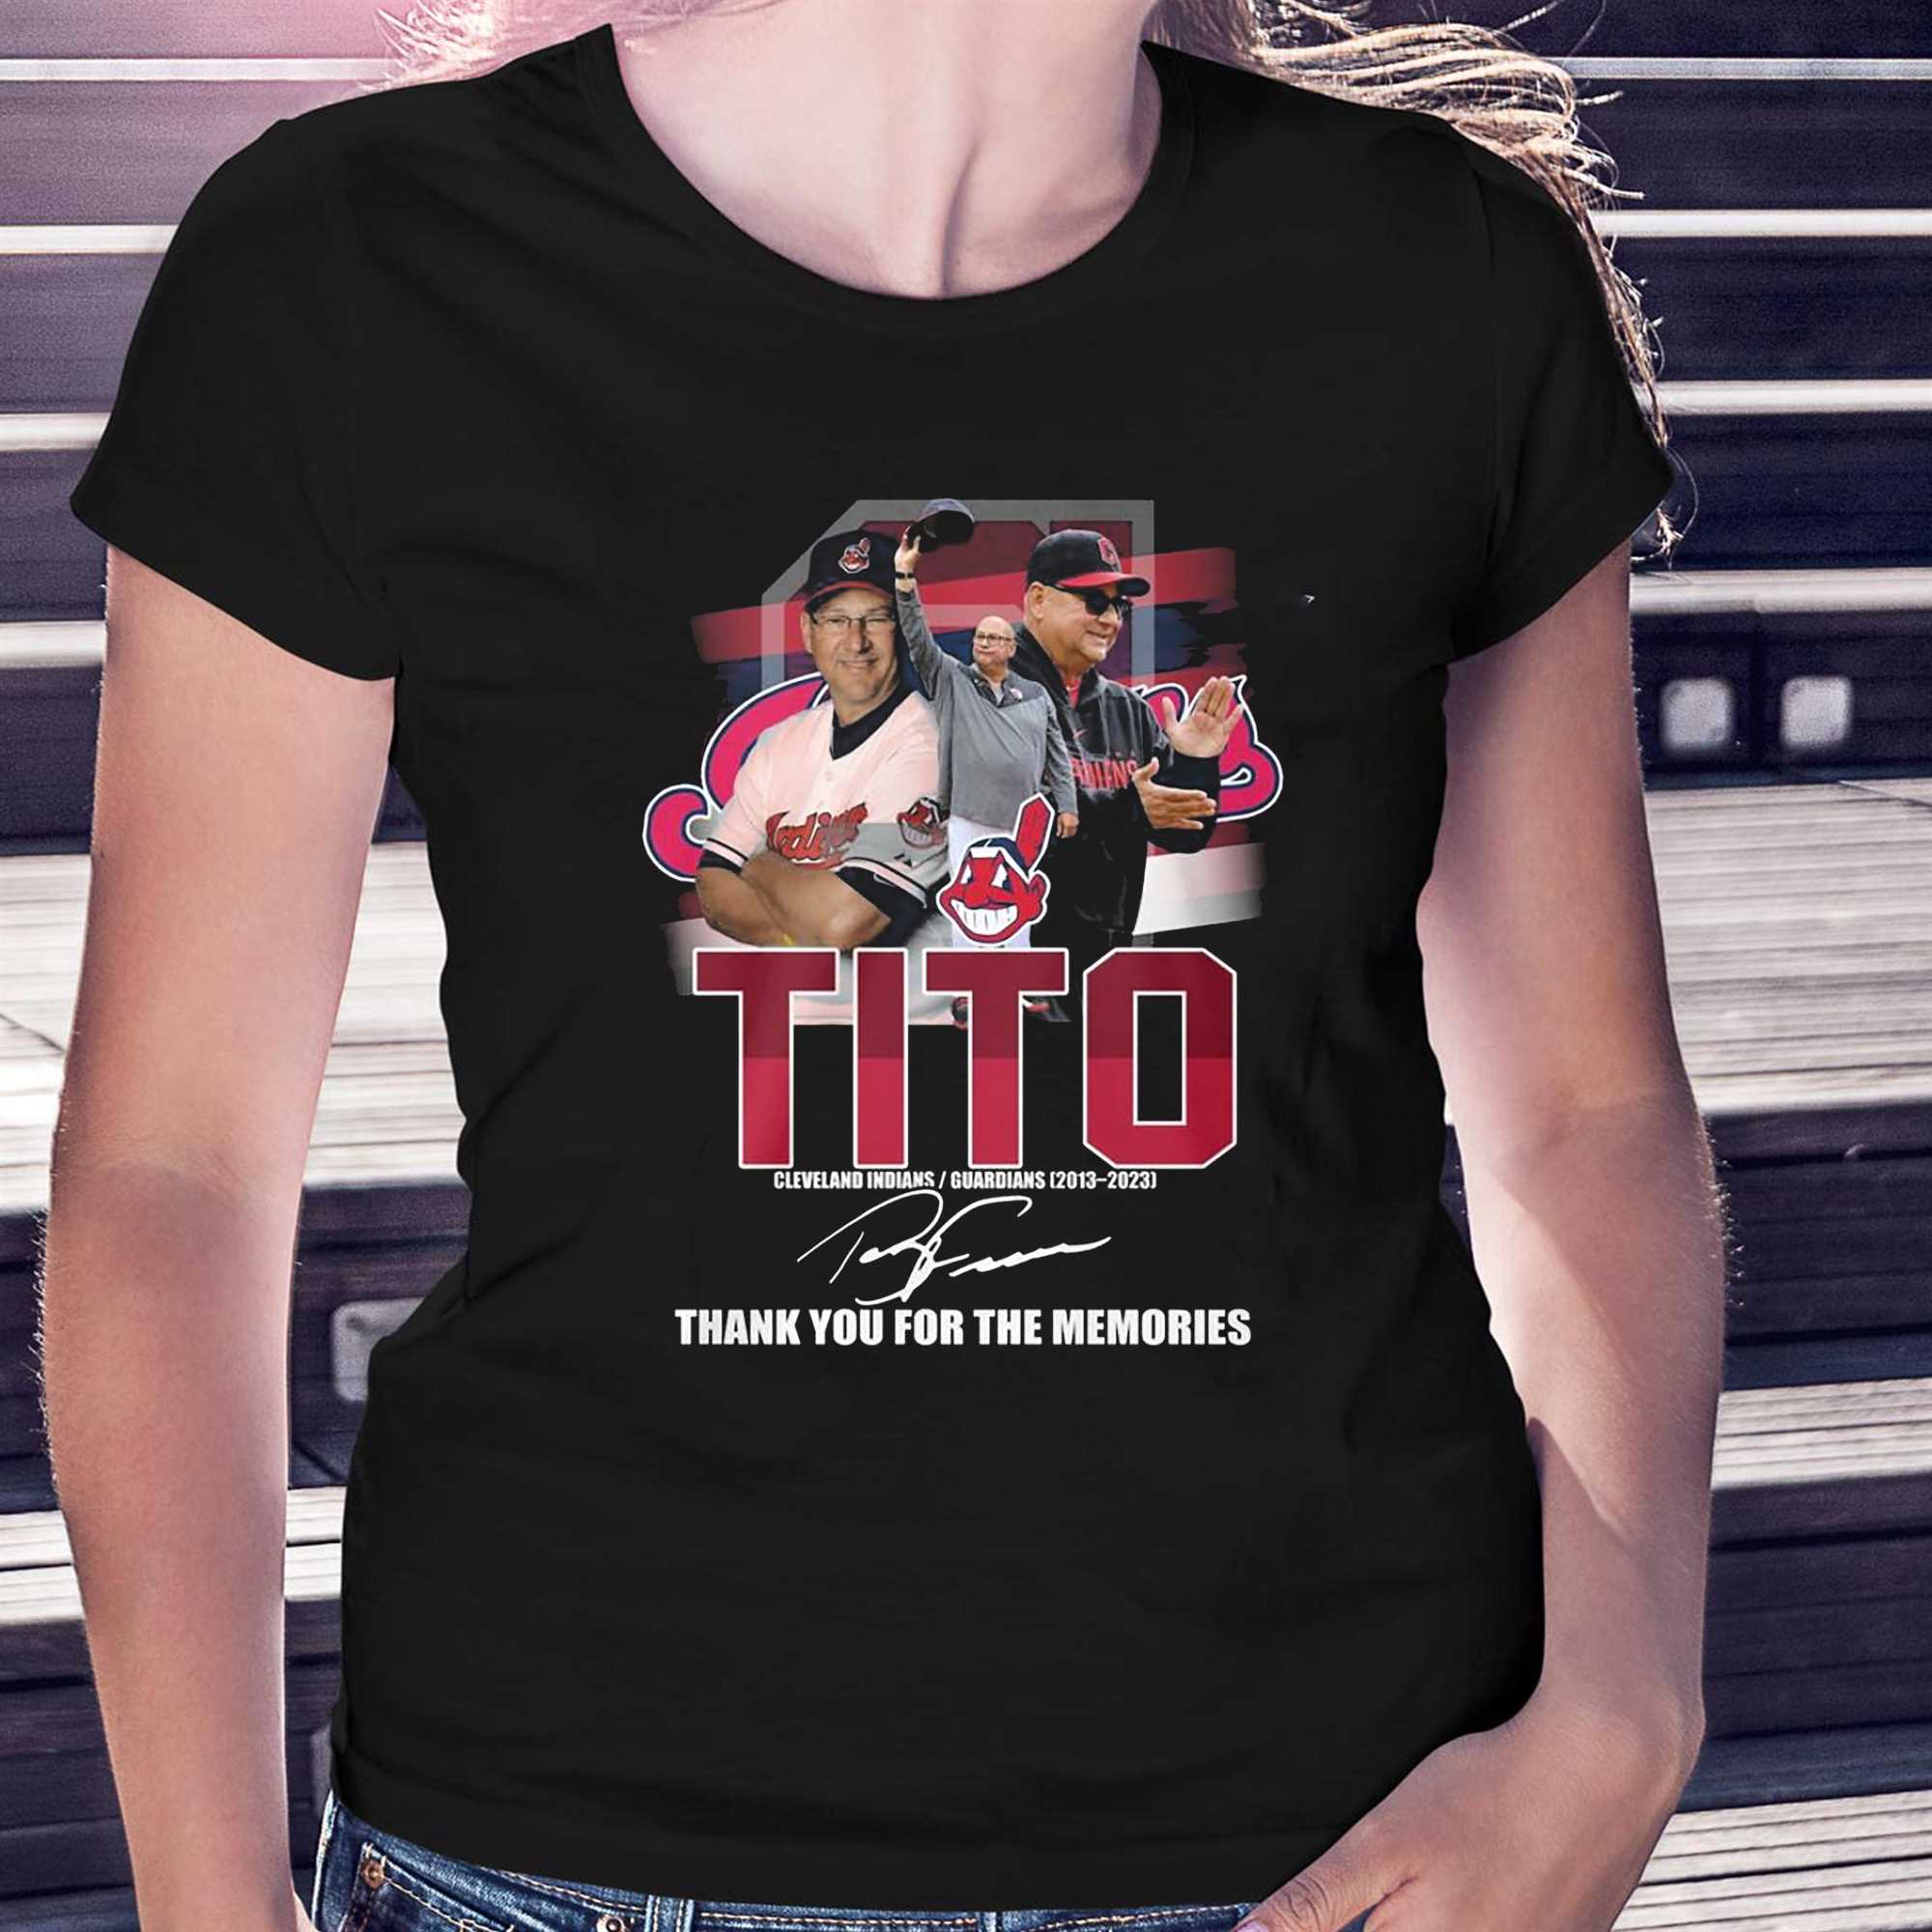 Tito Cleveland Indians, Guardians 2013 – 2023 Thank You For The Memories  Unisex T Shirt - Limotees